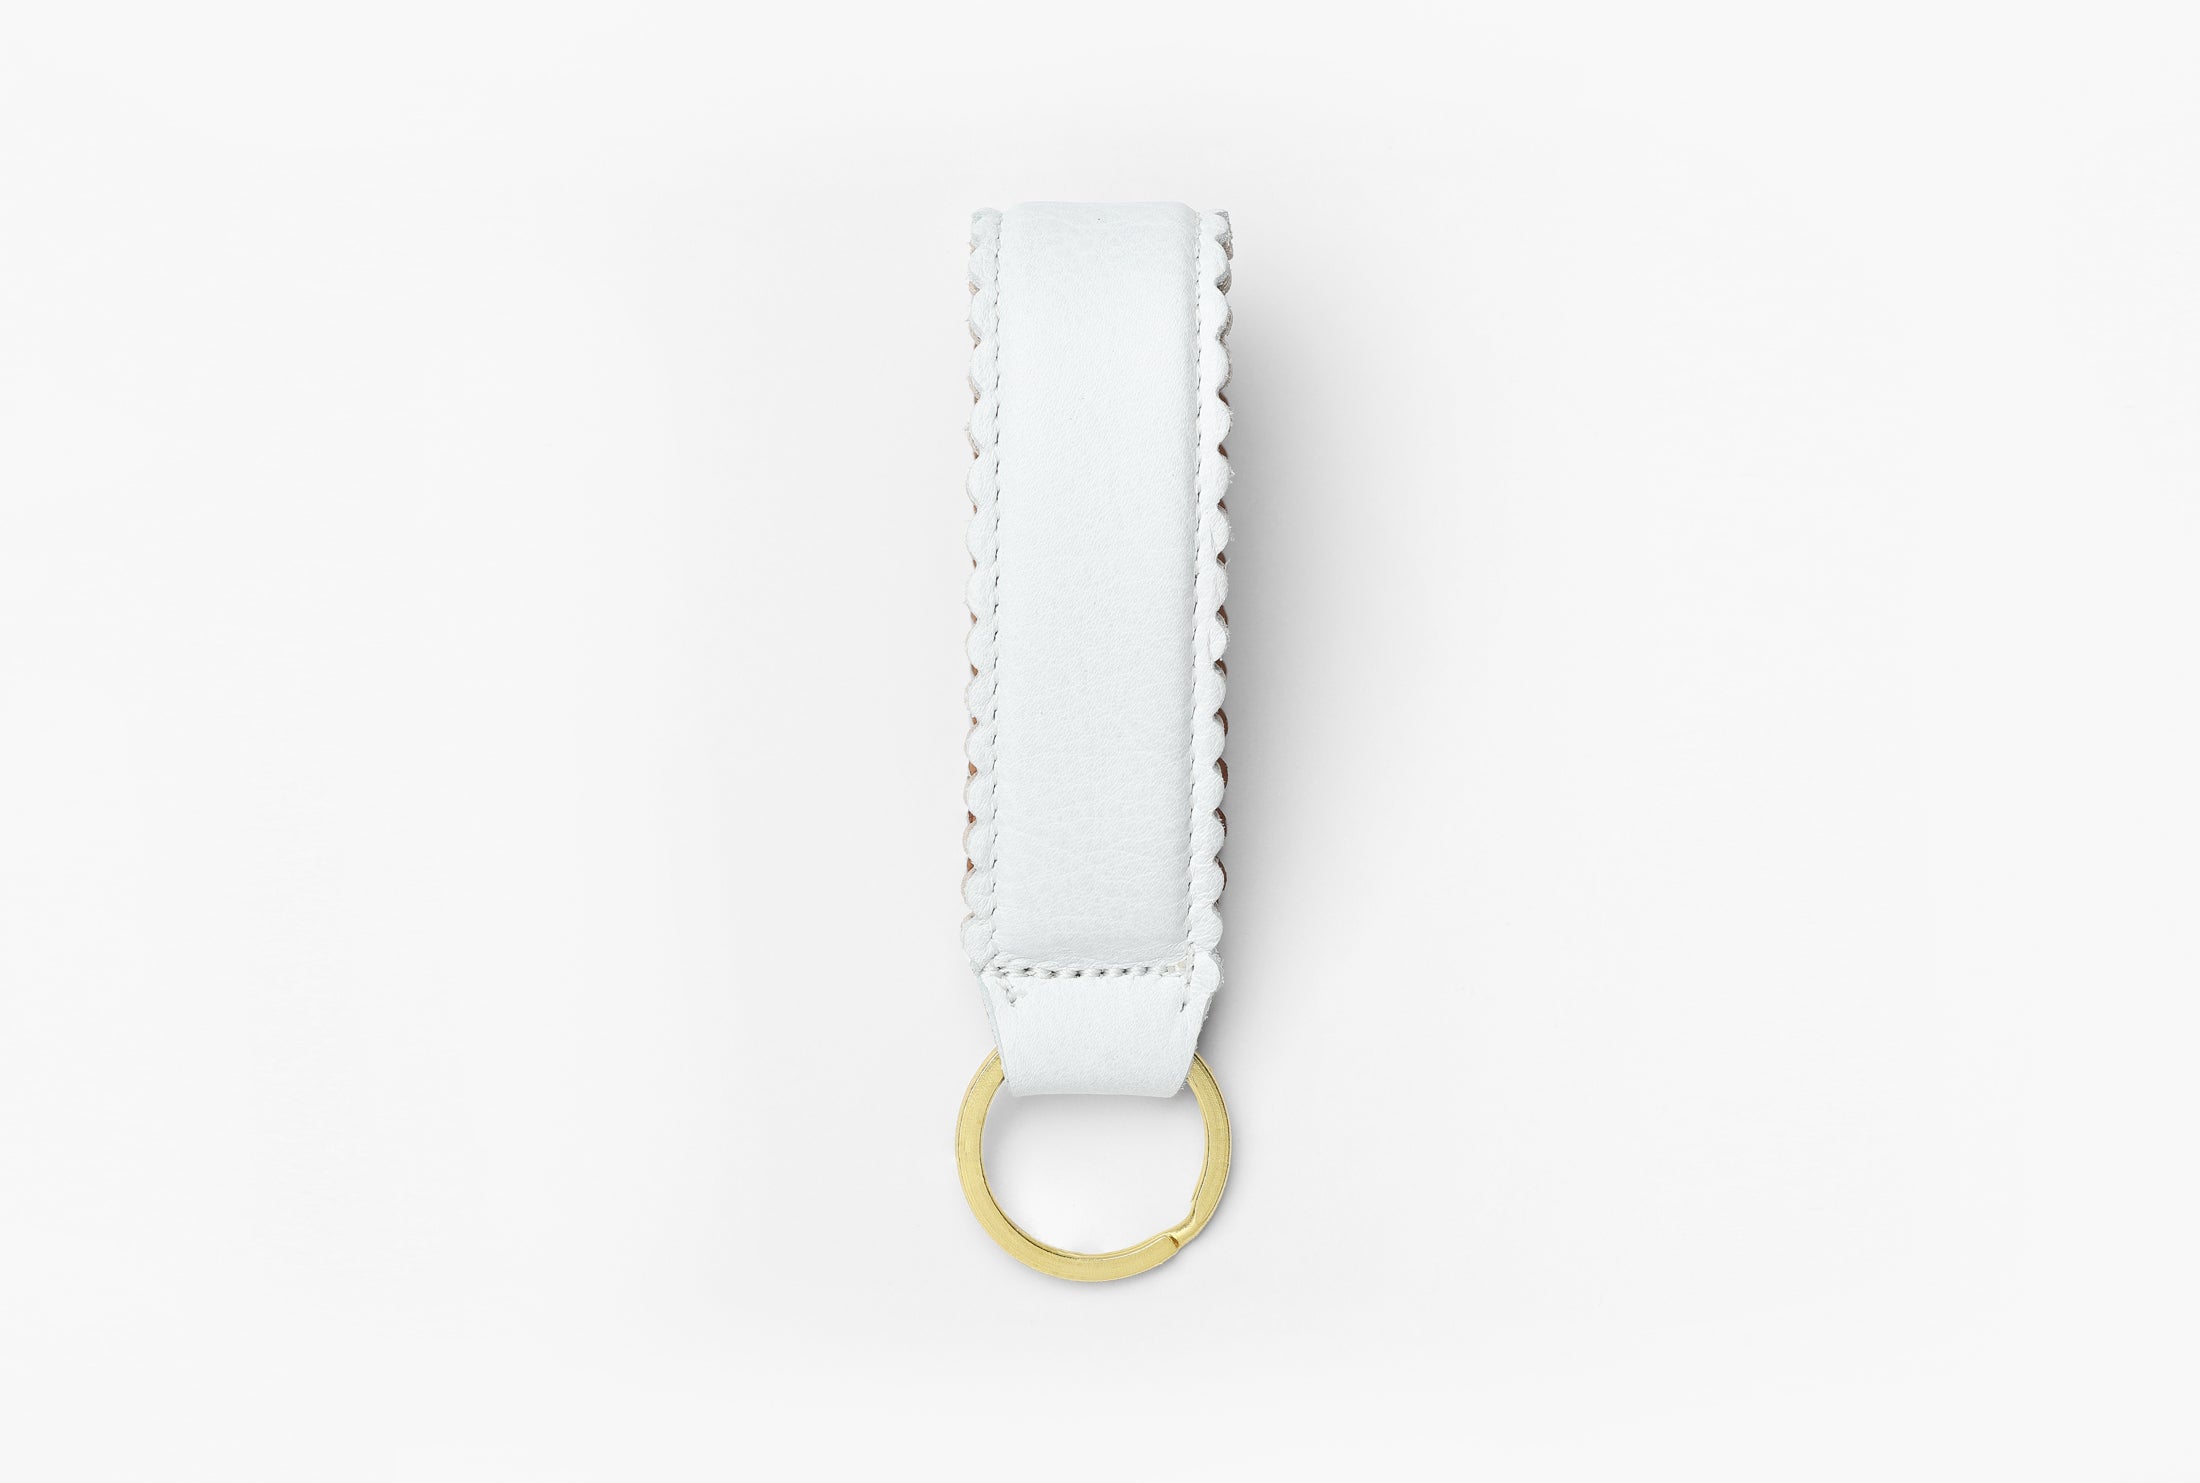 White and tan leather keychain with brass ring